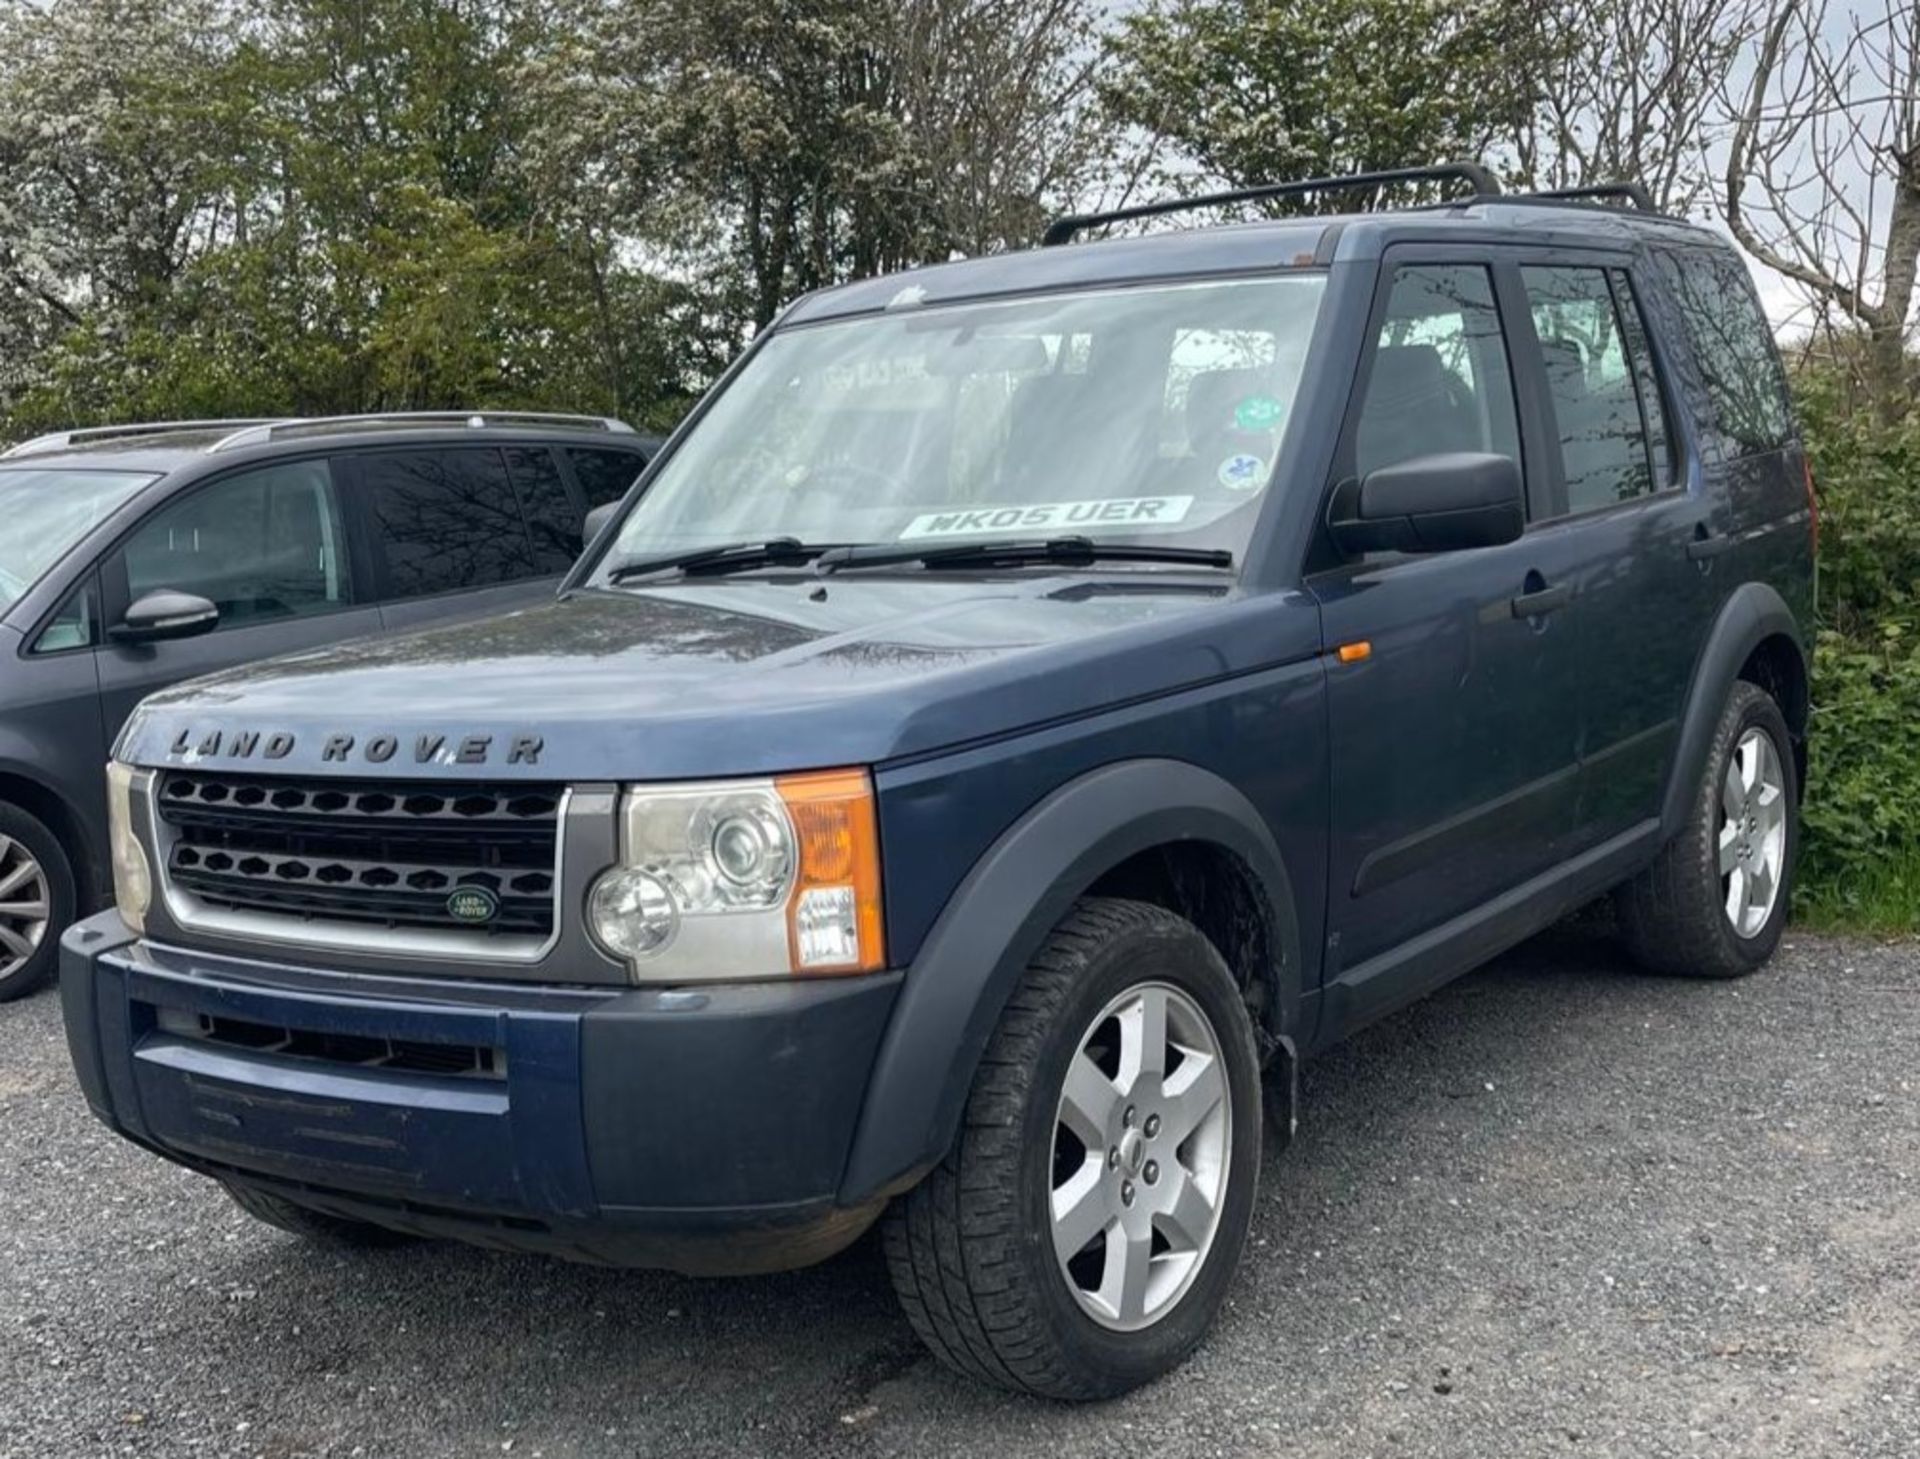 2005 Land Rover Discovery 3 Tdv6 S Auto - No Reserve - Image 3 of 14